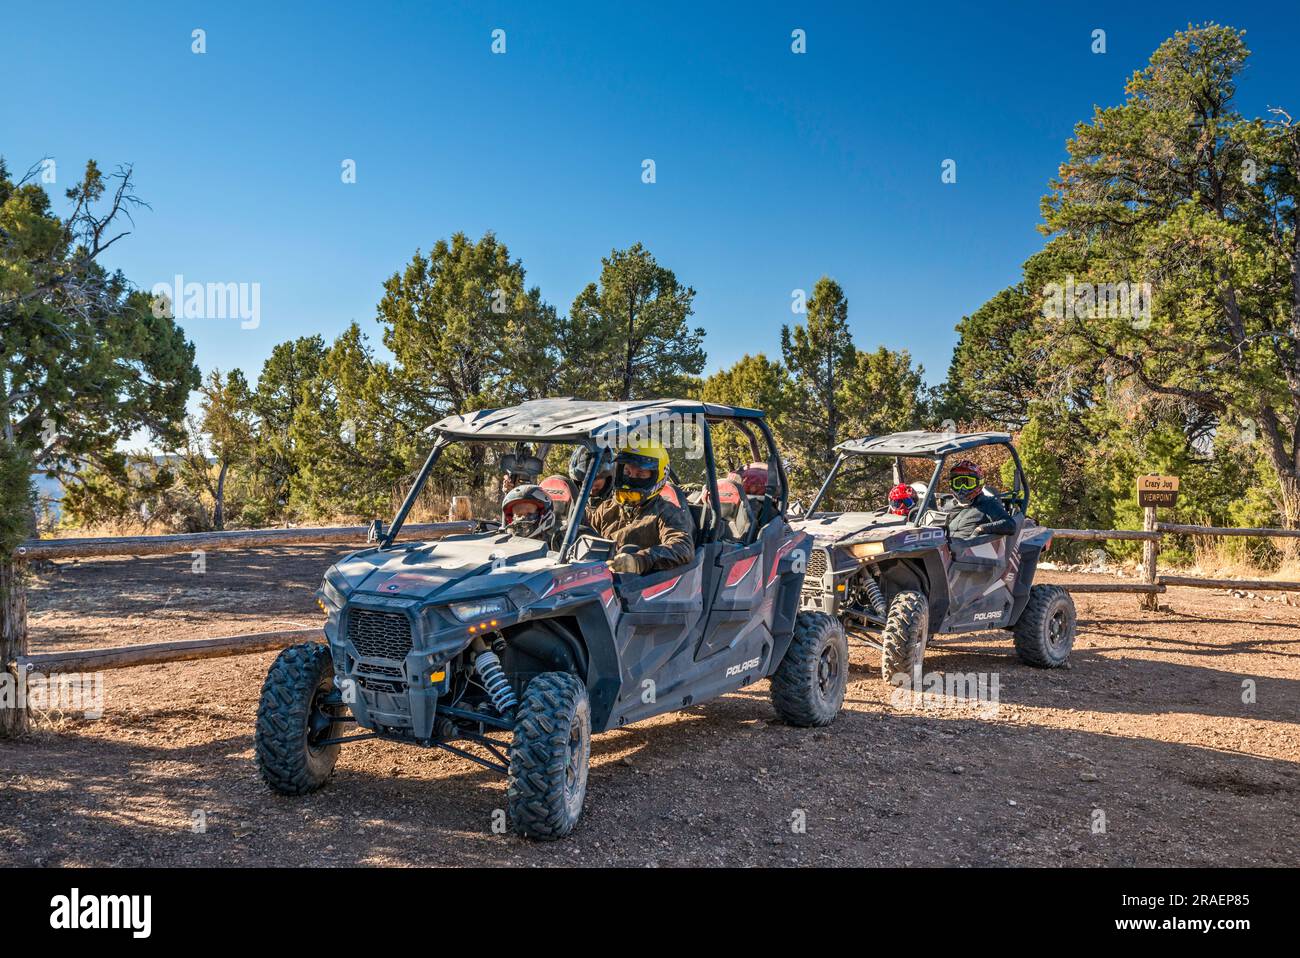 Young adults, UTV recreational vehicles, setting up to get going, Crazy Jug Viewpoint area, North Rim of Grand Canyon, Kaibab Plateau, Kaibab National Forest, Arizona, USA Stock Photo